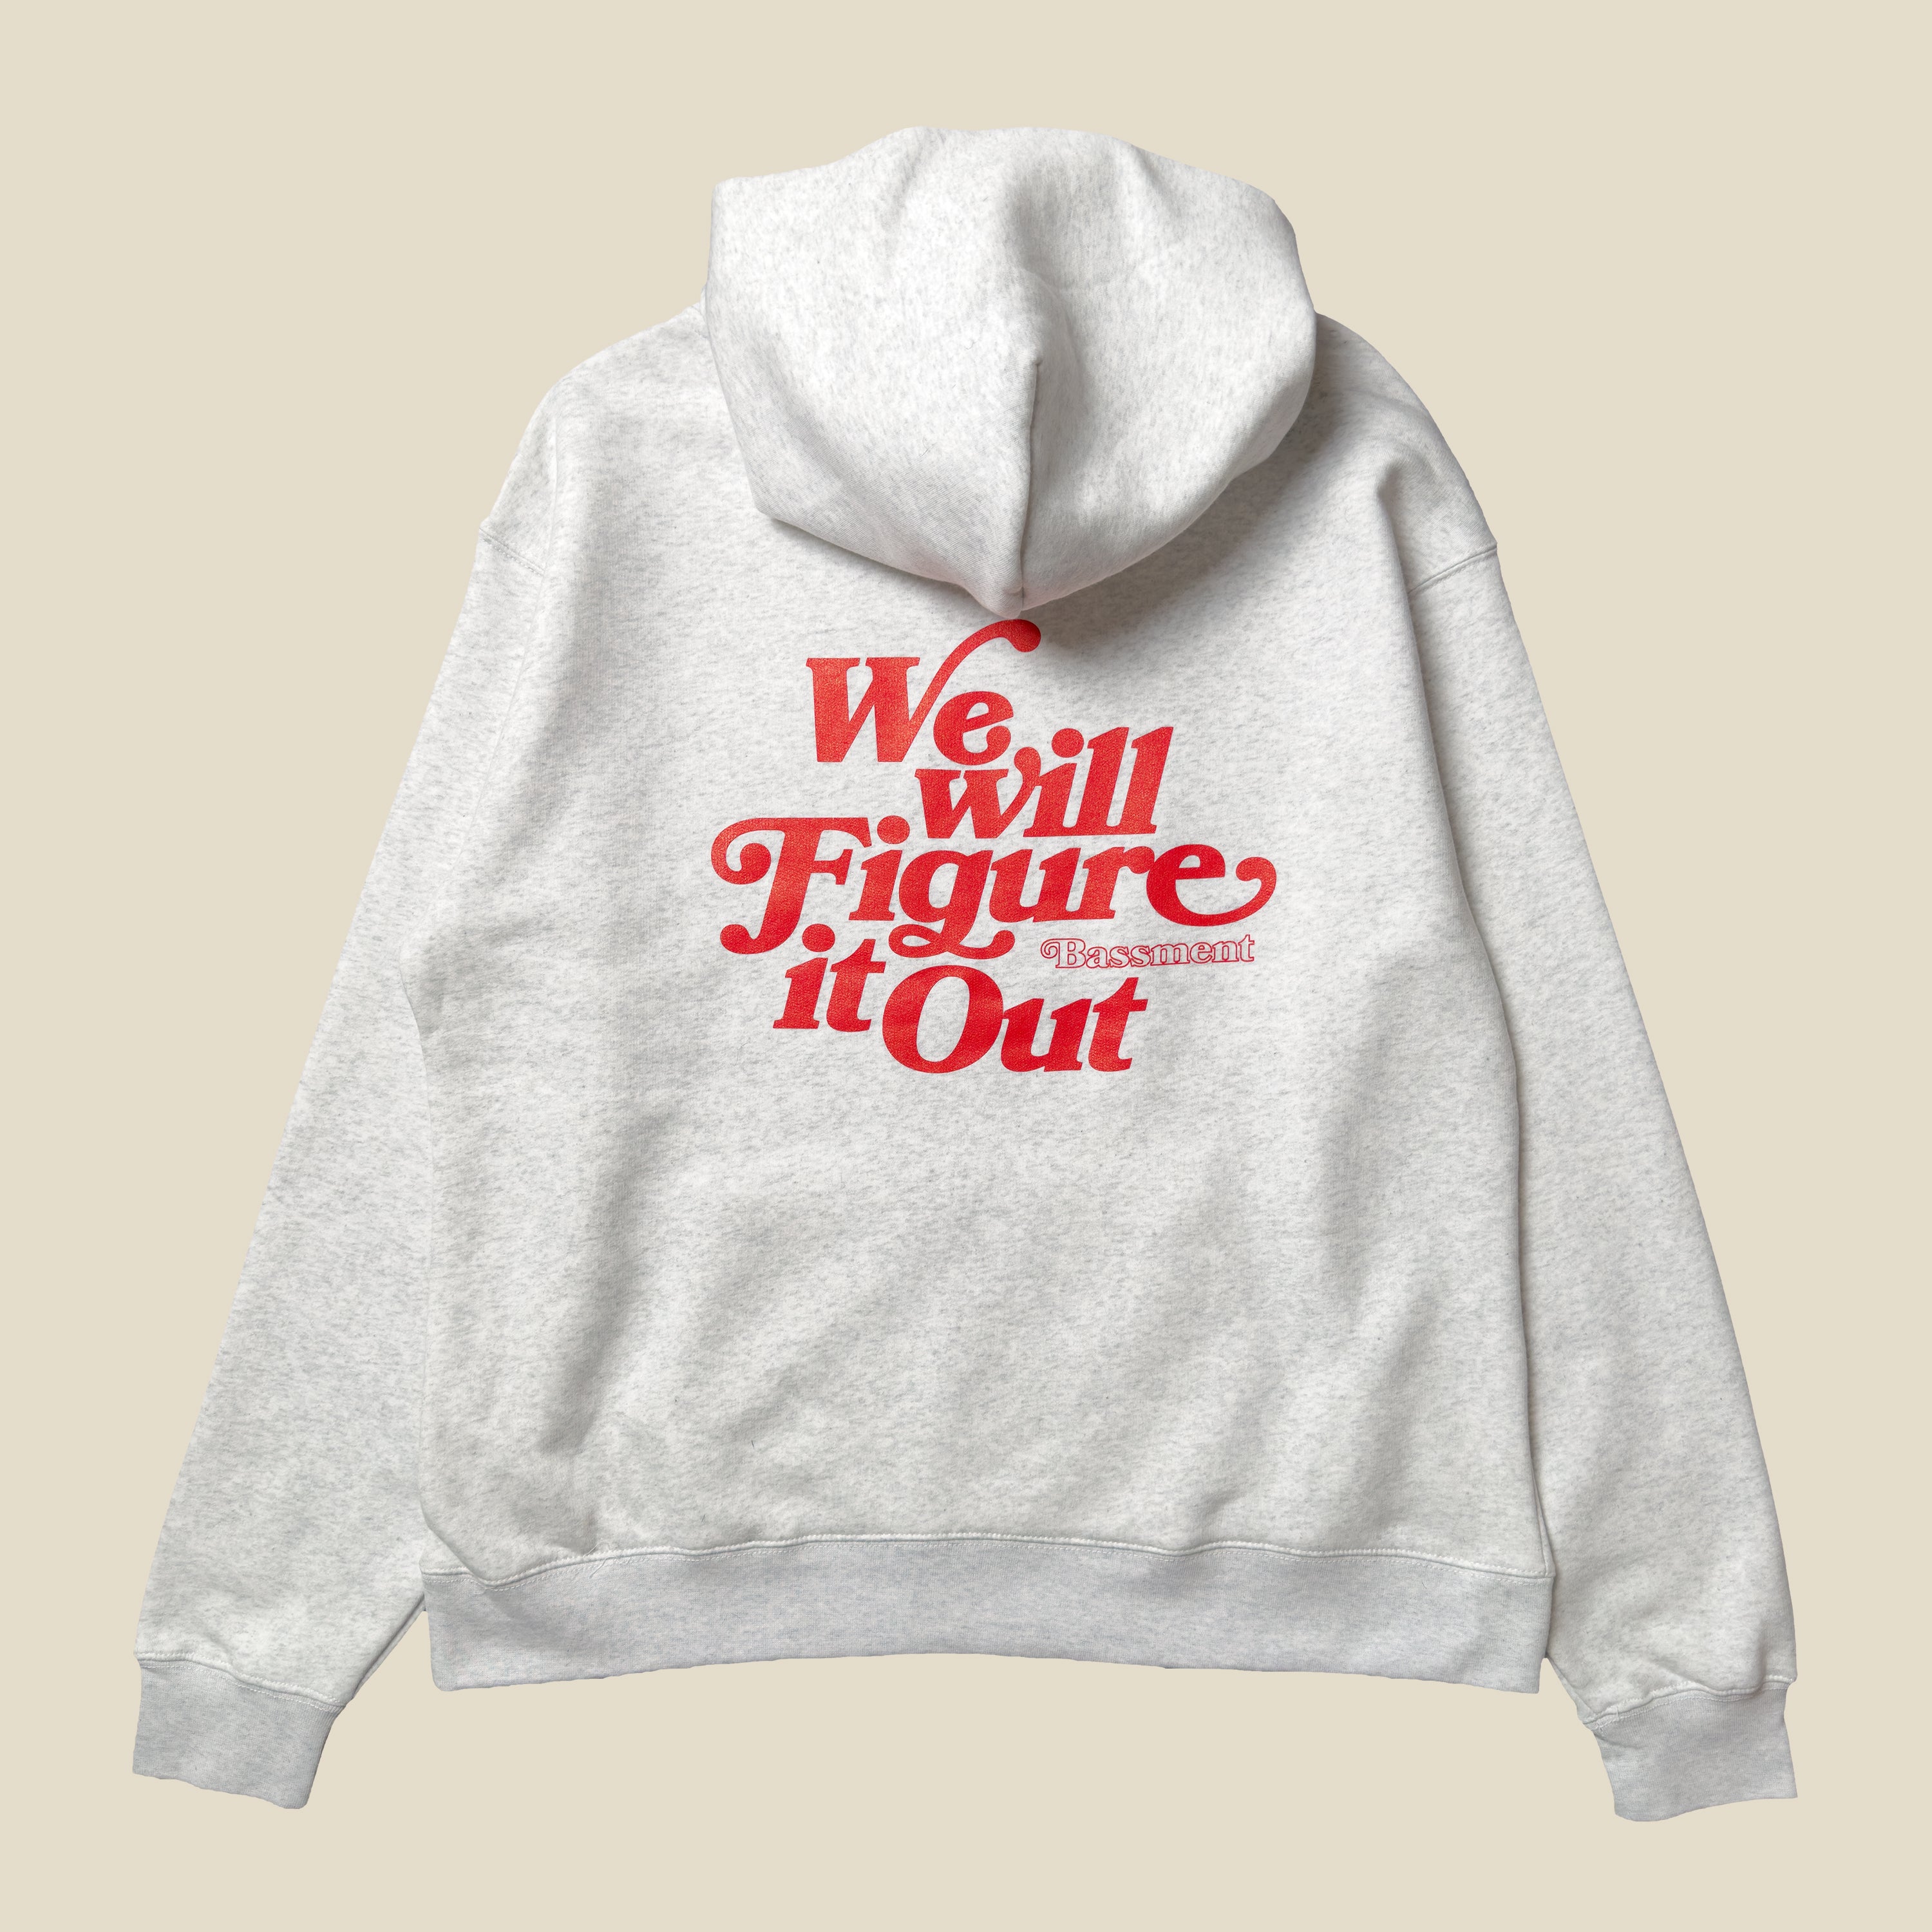 WE WILL FIGURE IT OUT Hoodie (Last One - Black - Large)